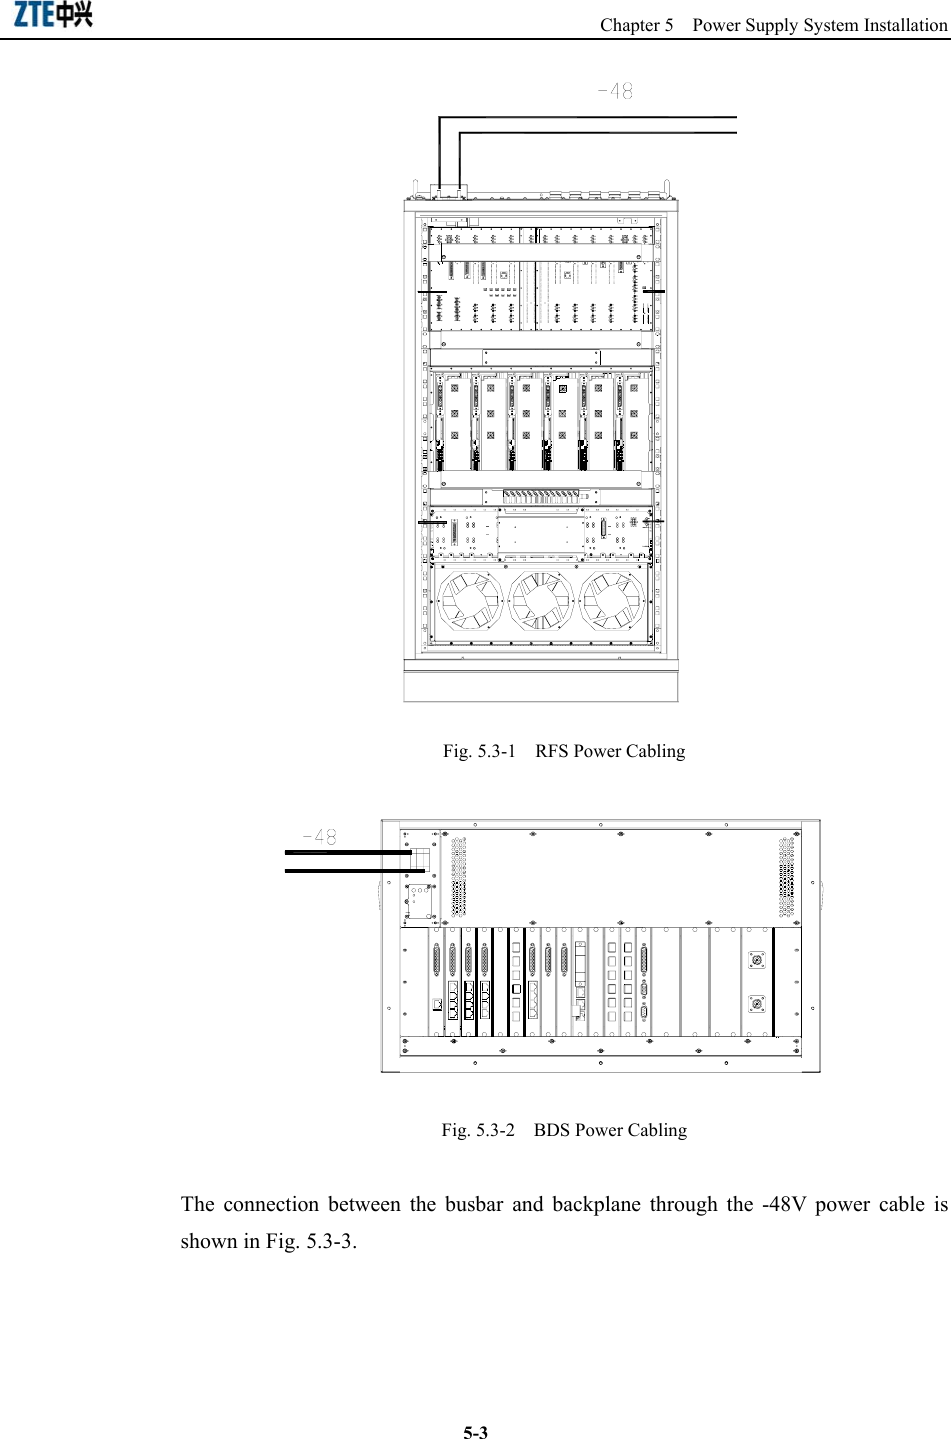                                                       Chapter 5  Power Supply System Installation  5-3 Fig. 5.3-1    RFS Power Cabling  Fig. 5.3-2    BDS Power Cabling The connection between the busbar and backplane through the -48V power cable is shown in Fig. 5.3-3. 